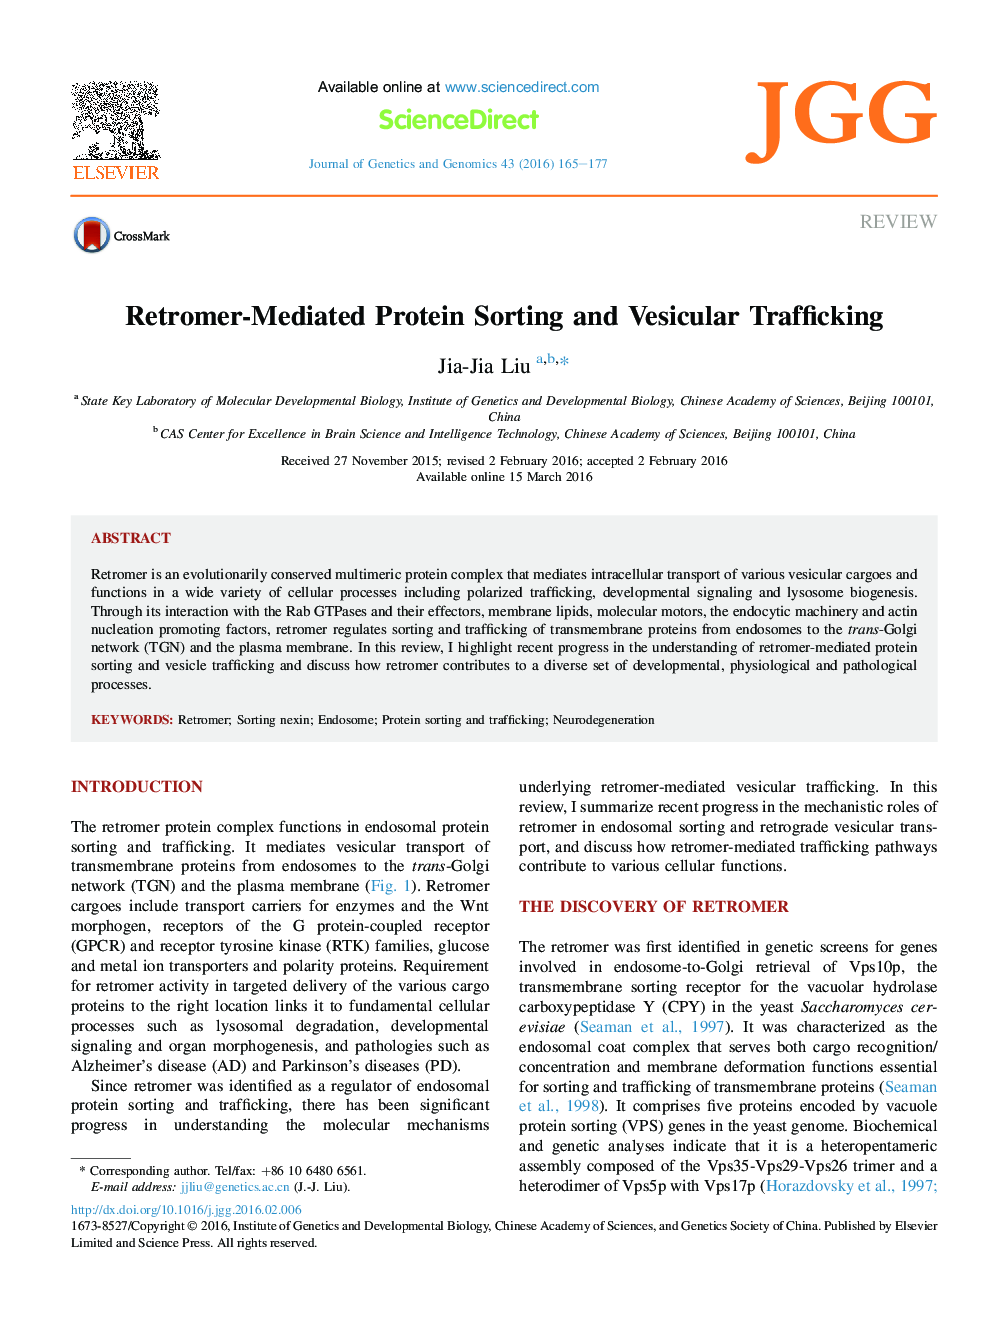 Retromer-Mediated Protein Sorting and Vesicular Trafficking